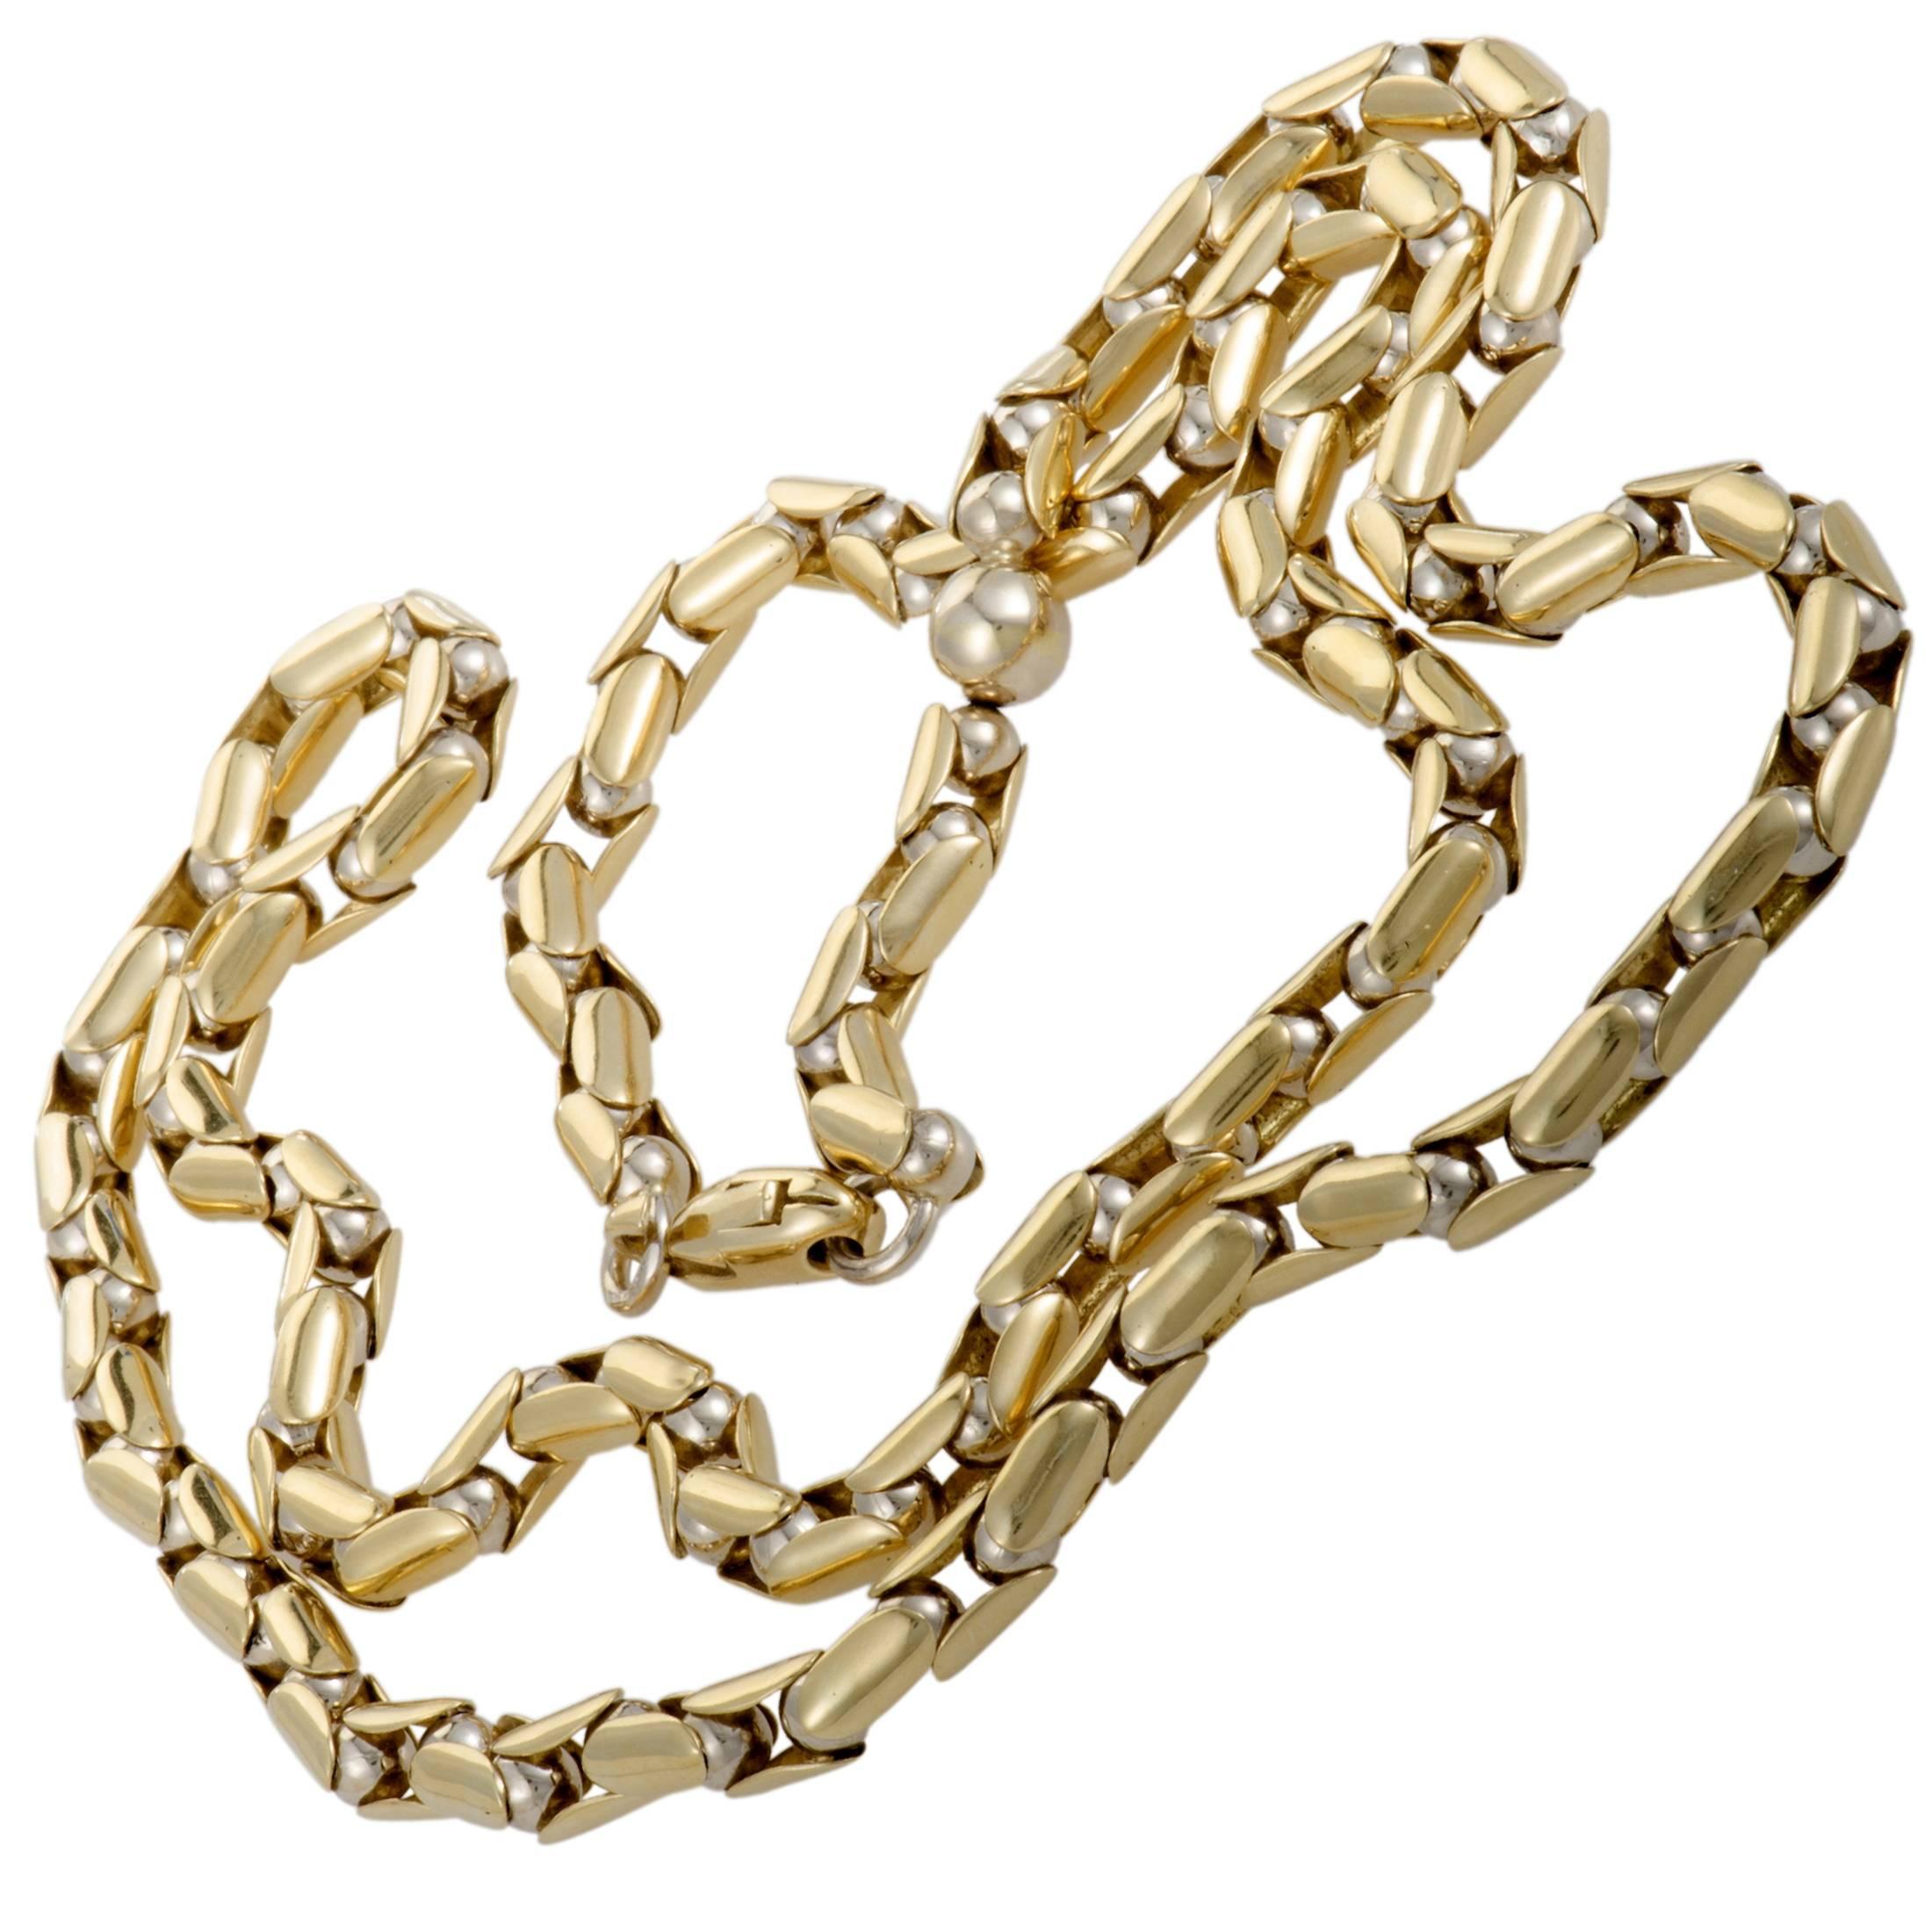 Boasting a stunningly offbeat and incredibly masculine appeal, this superb Sauro chain is the perfect choice for a discerning gentleman. The chain is expertly crafted from prestigious 18K yellow gold and weighs 96.2 grams. 